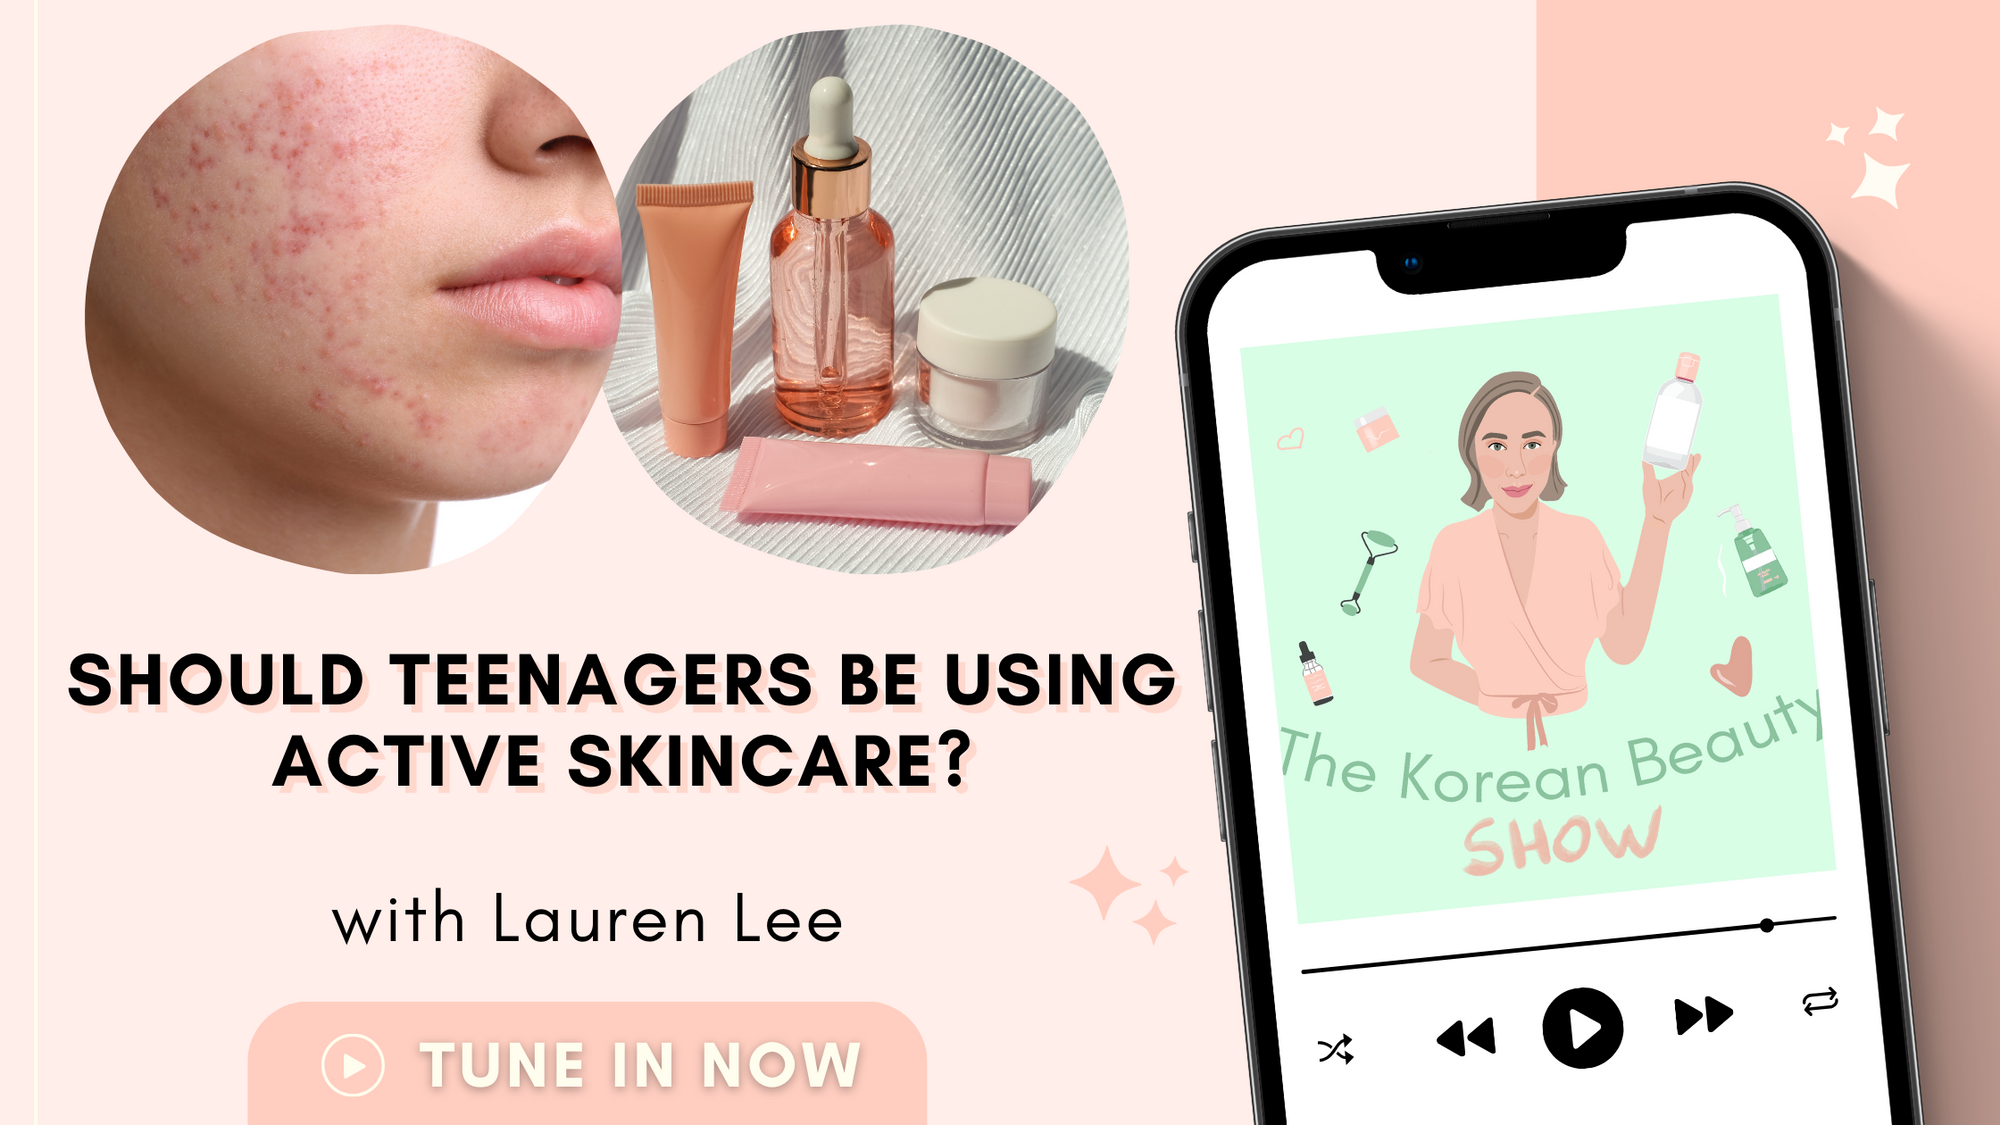 Should teenagers be using active skincare?